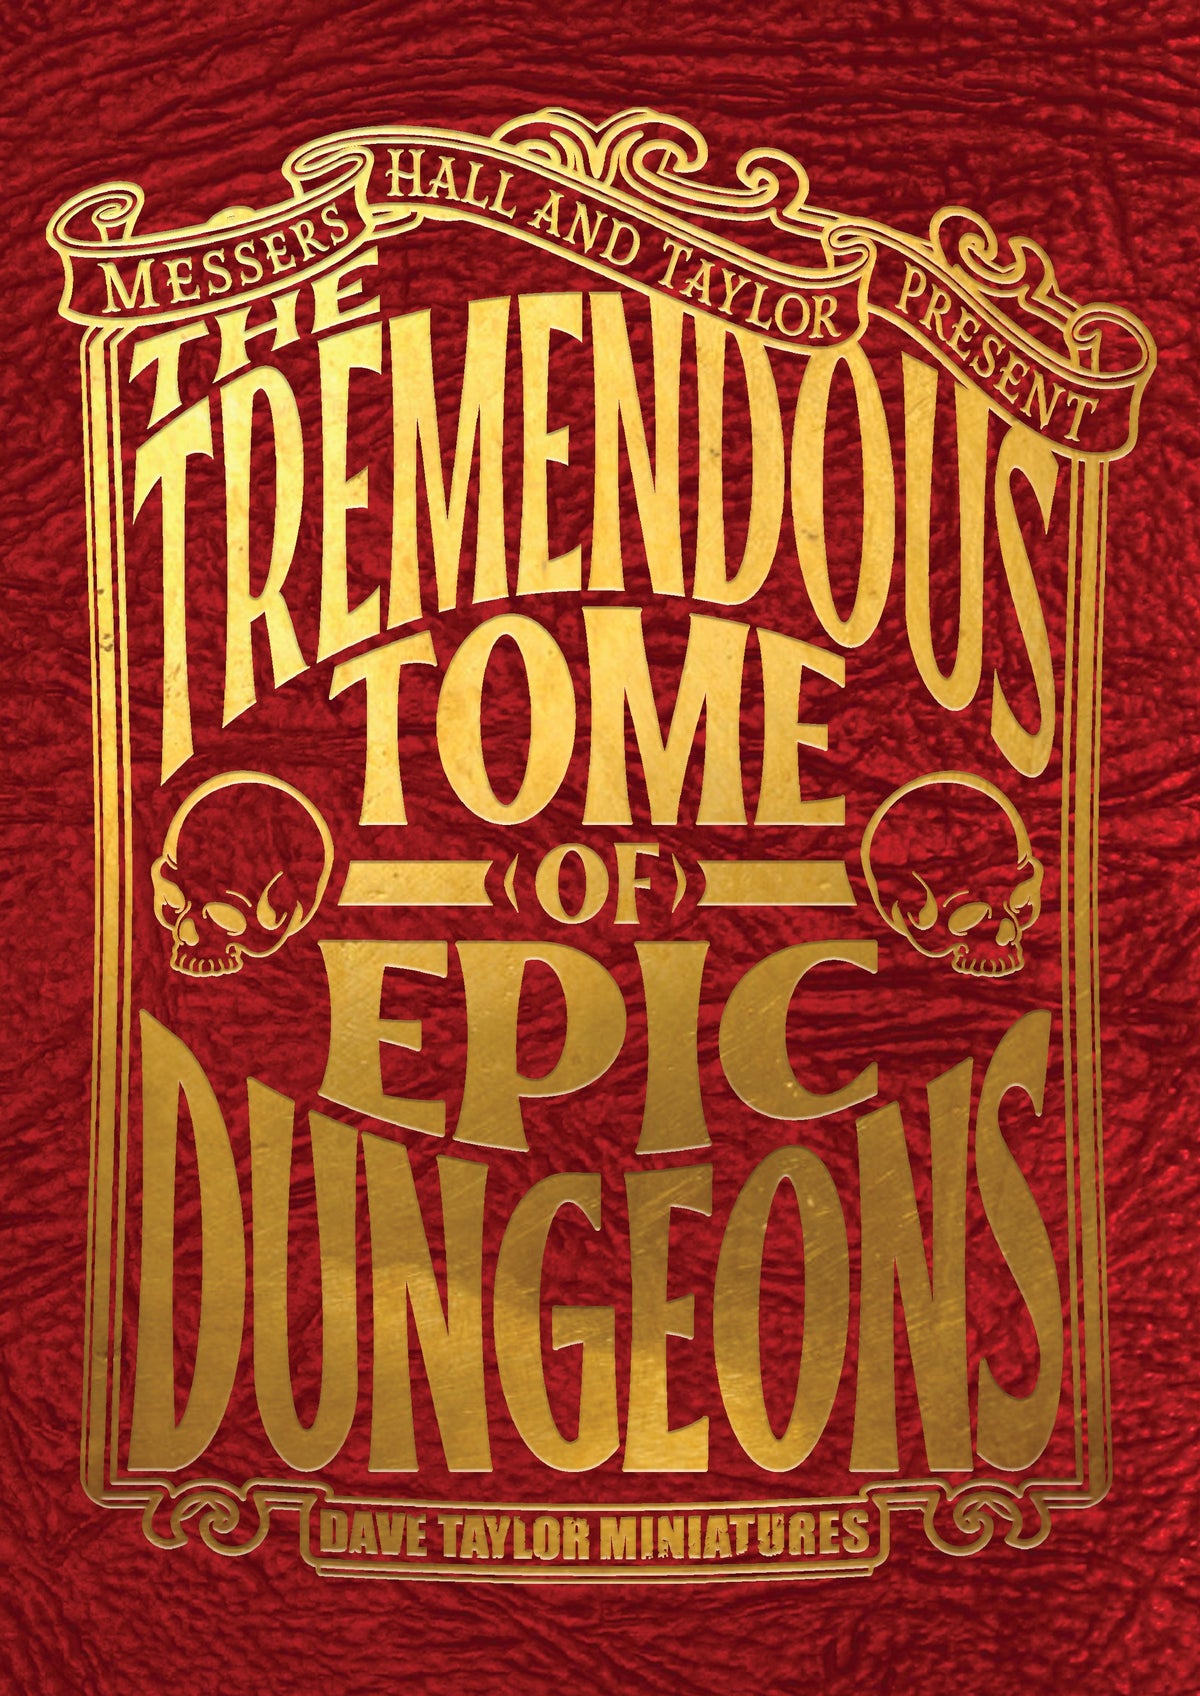 The Tremendous Tome of Epic Dungeons